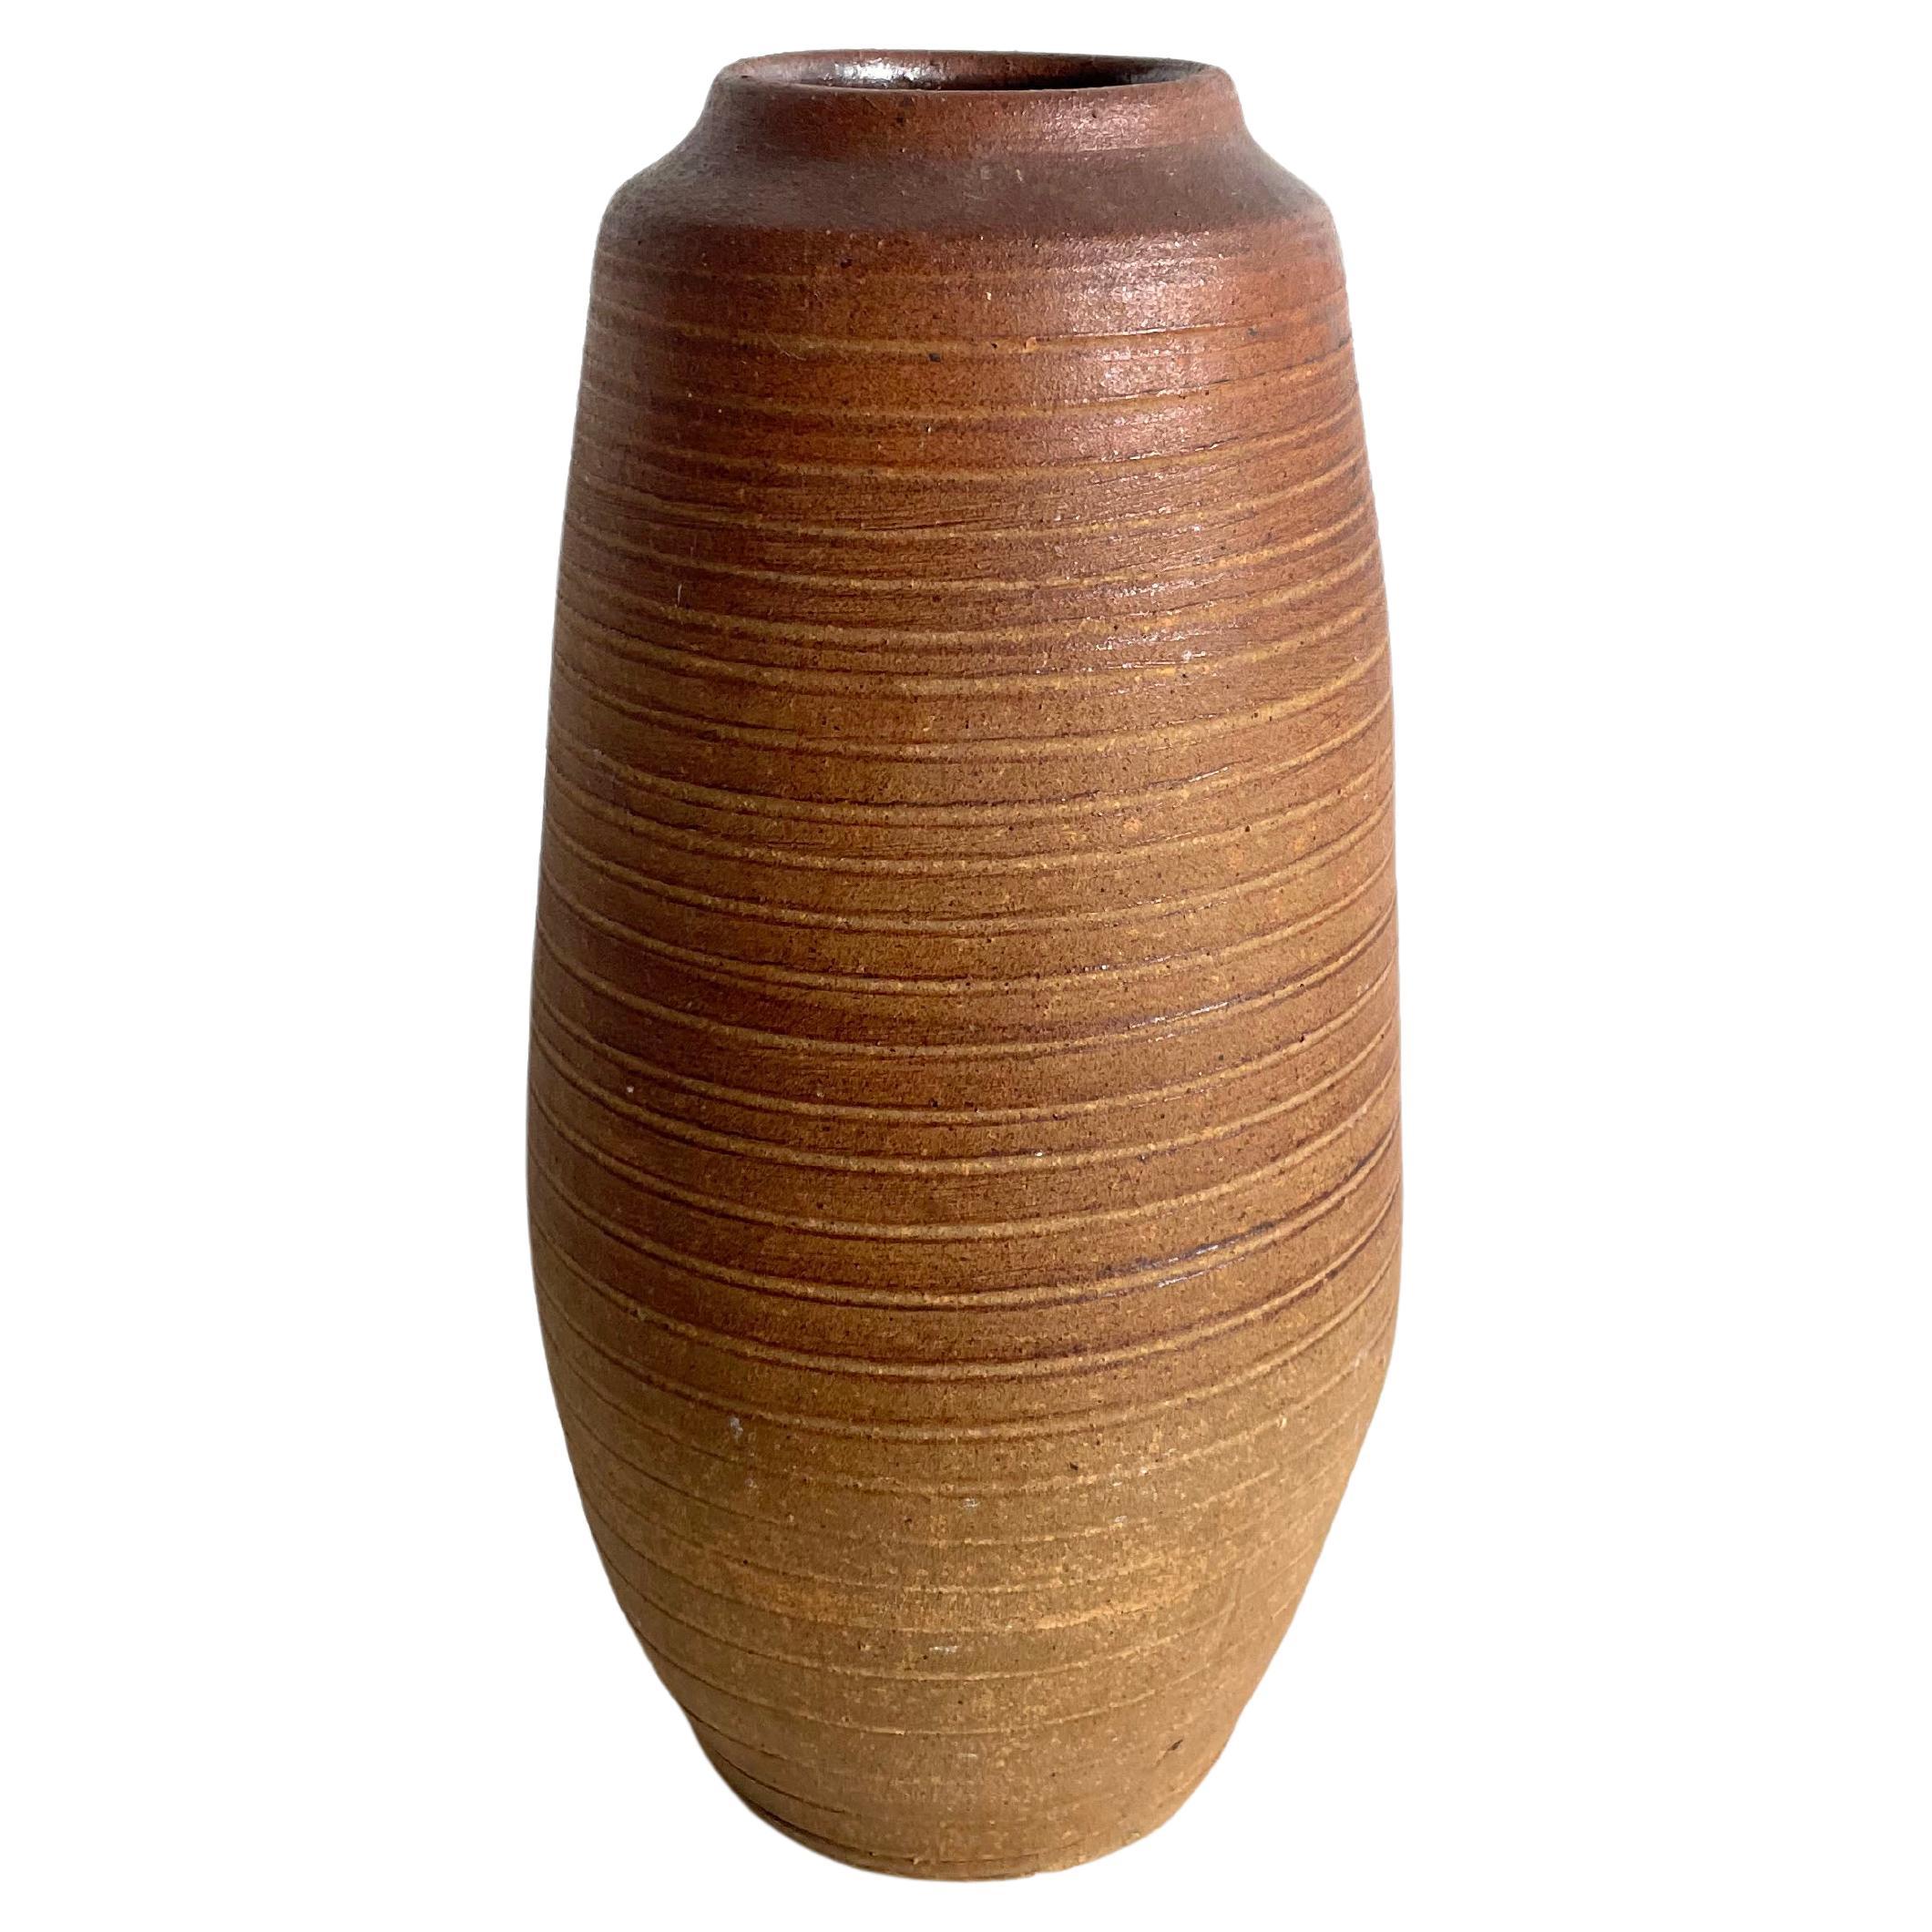 Vintage Teracotta Vase with textured surface, Wabi Sabi, Studio Pottery, Marked For Sale